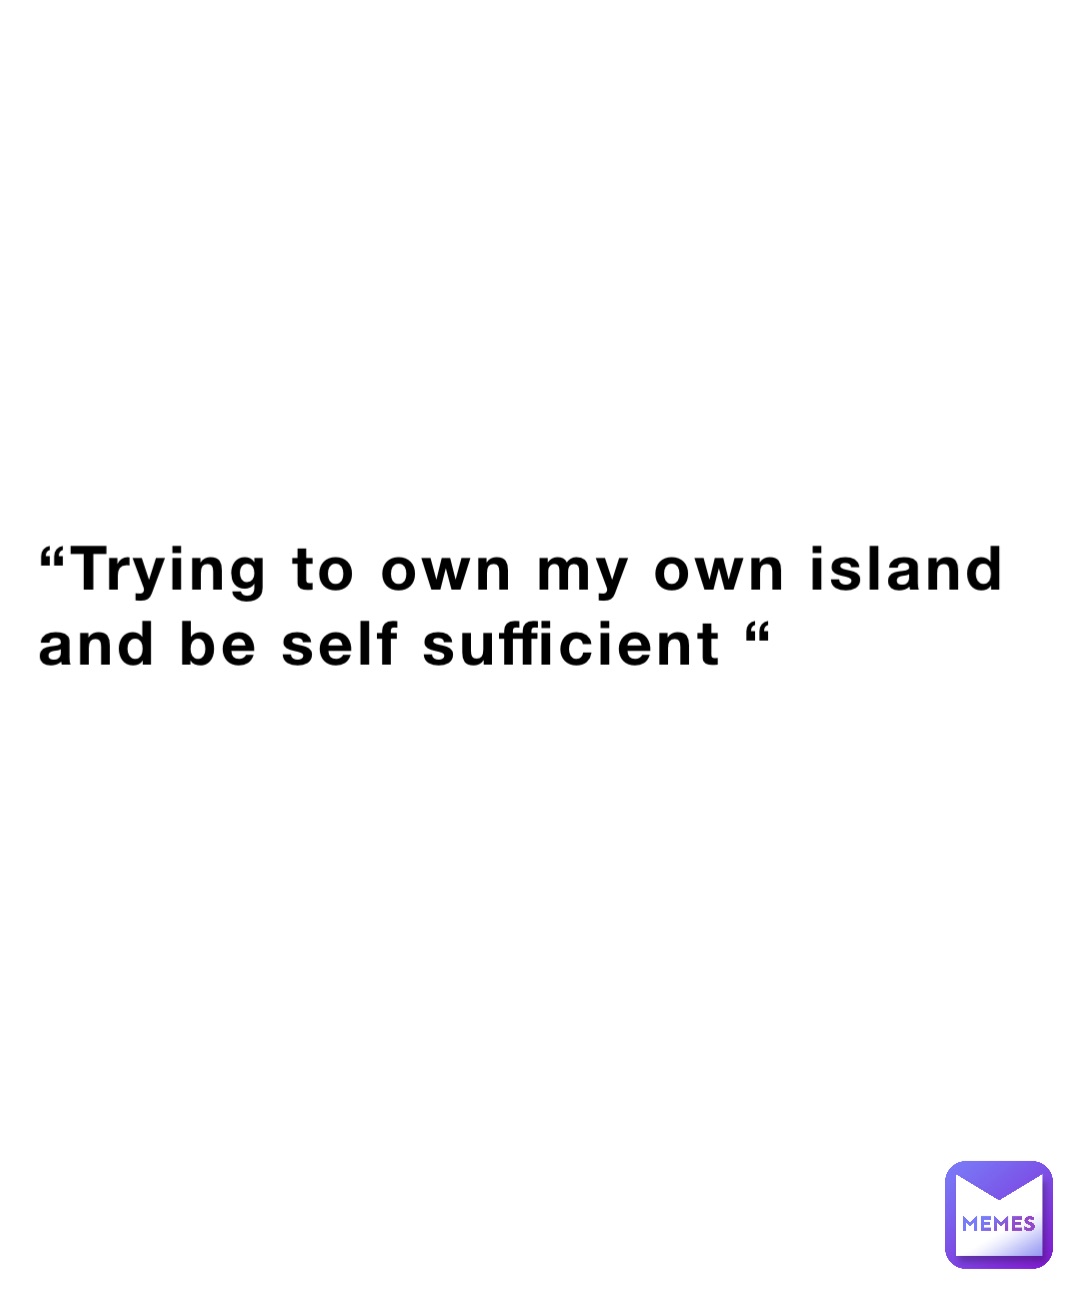 “Trying to own my own island and be self sufficient “